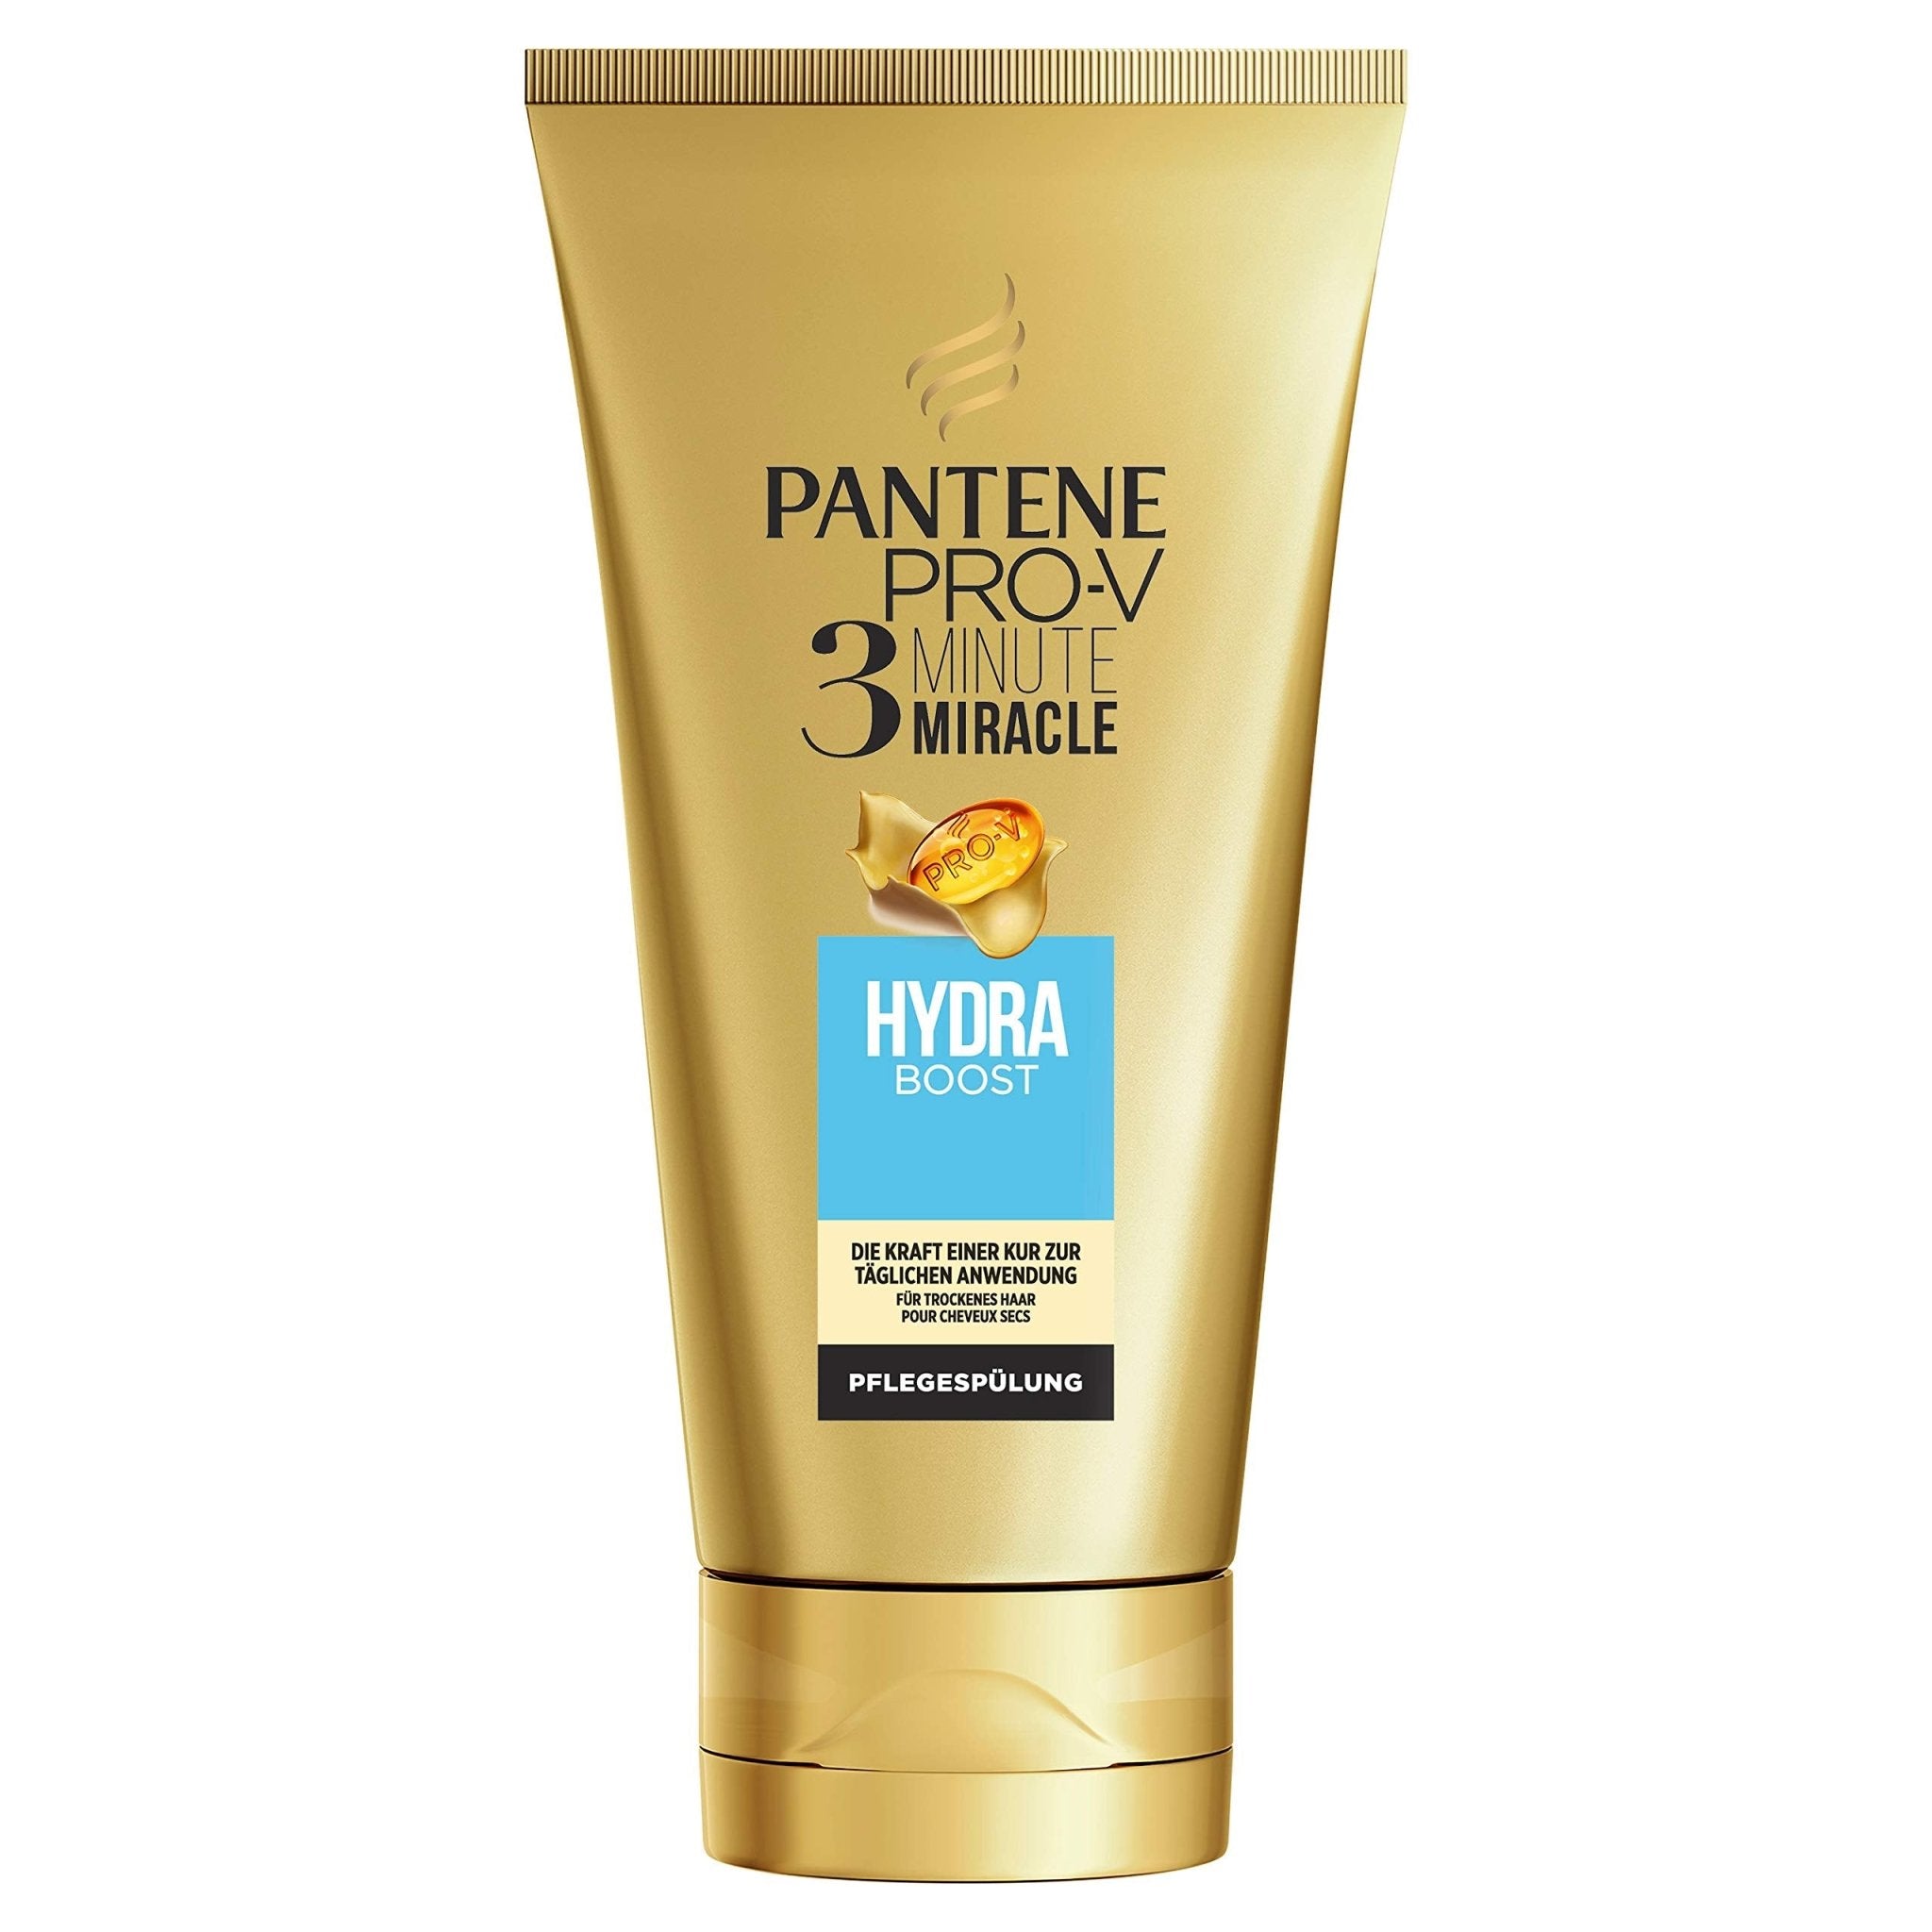 Pantene Pro-V Hydra Boost Miracle Conditioner for Dry Hair 150ml - IZZAT DAOUK Lebanon